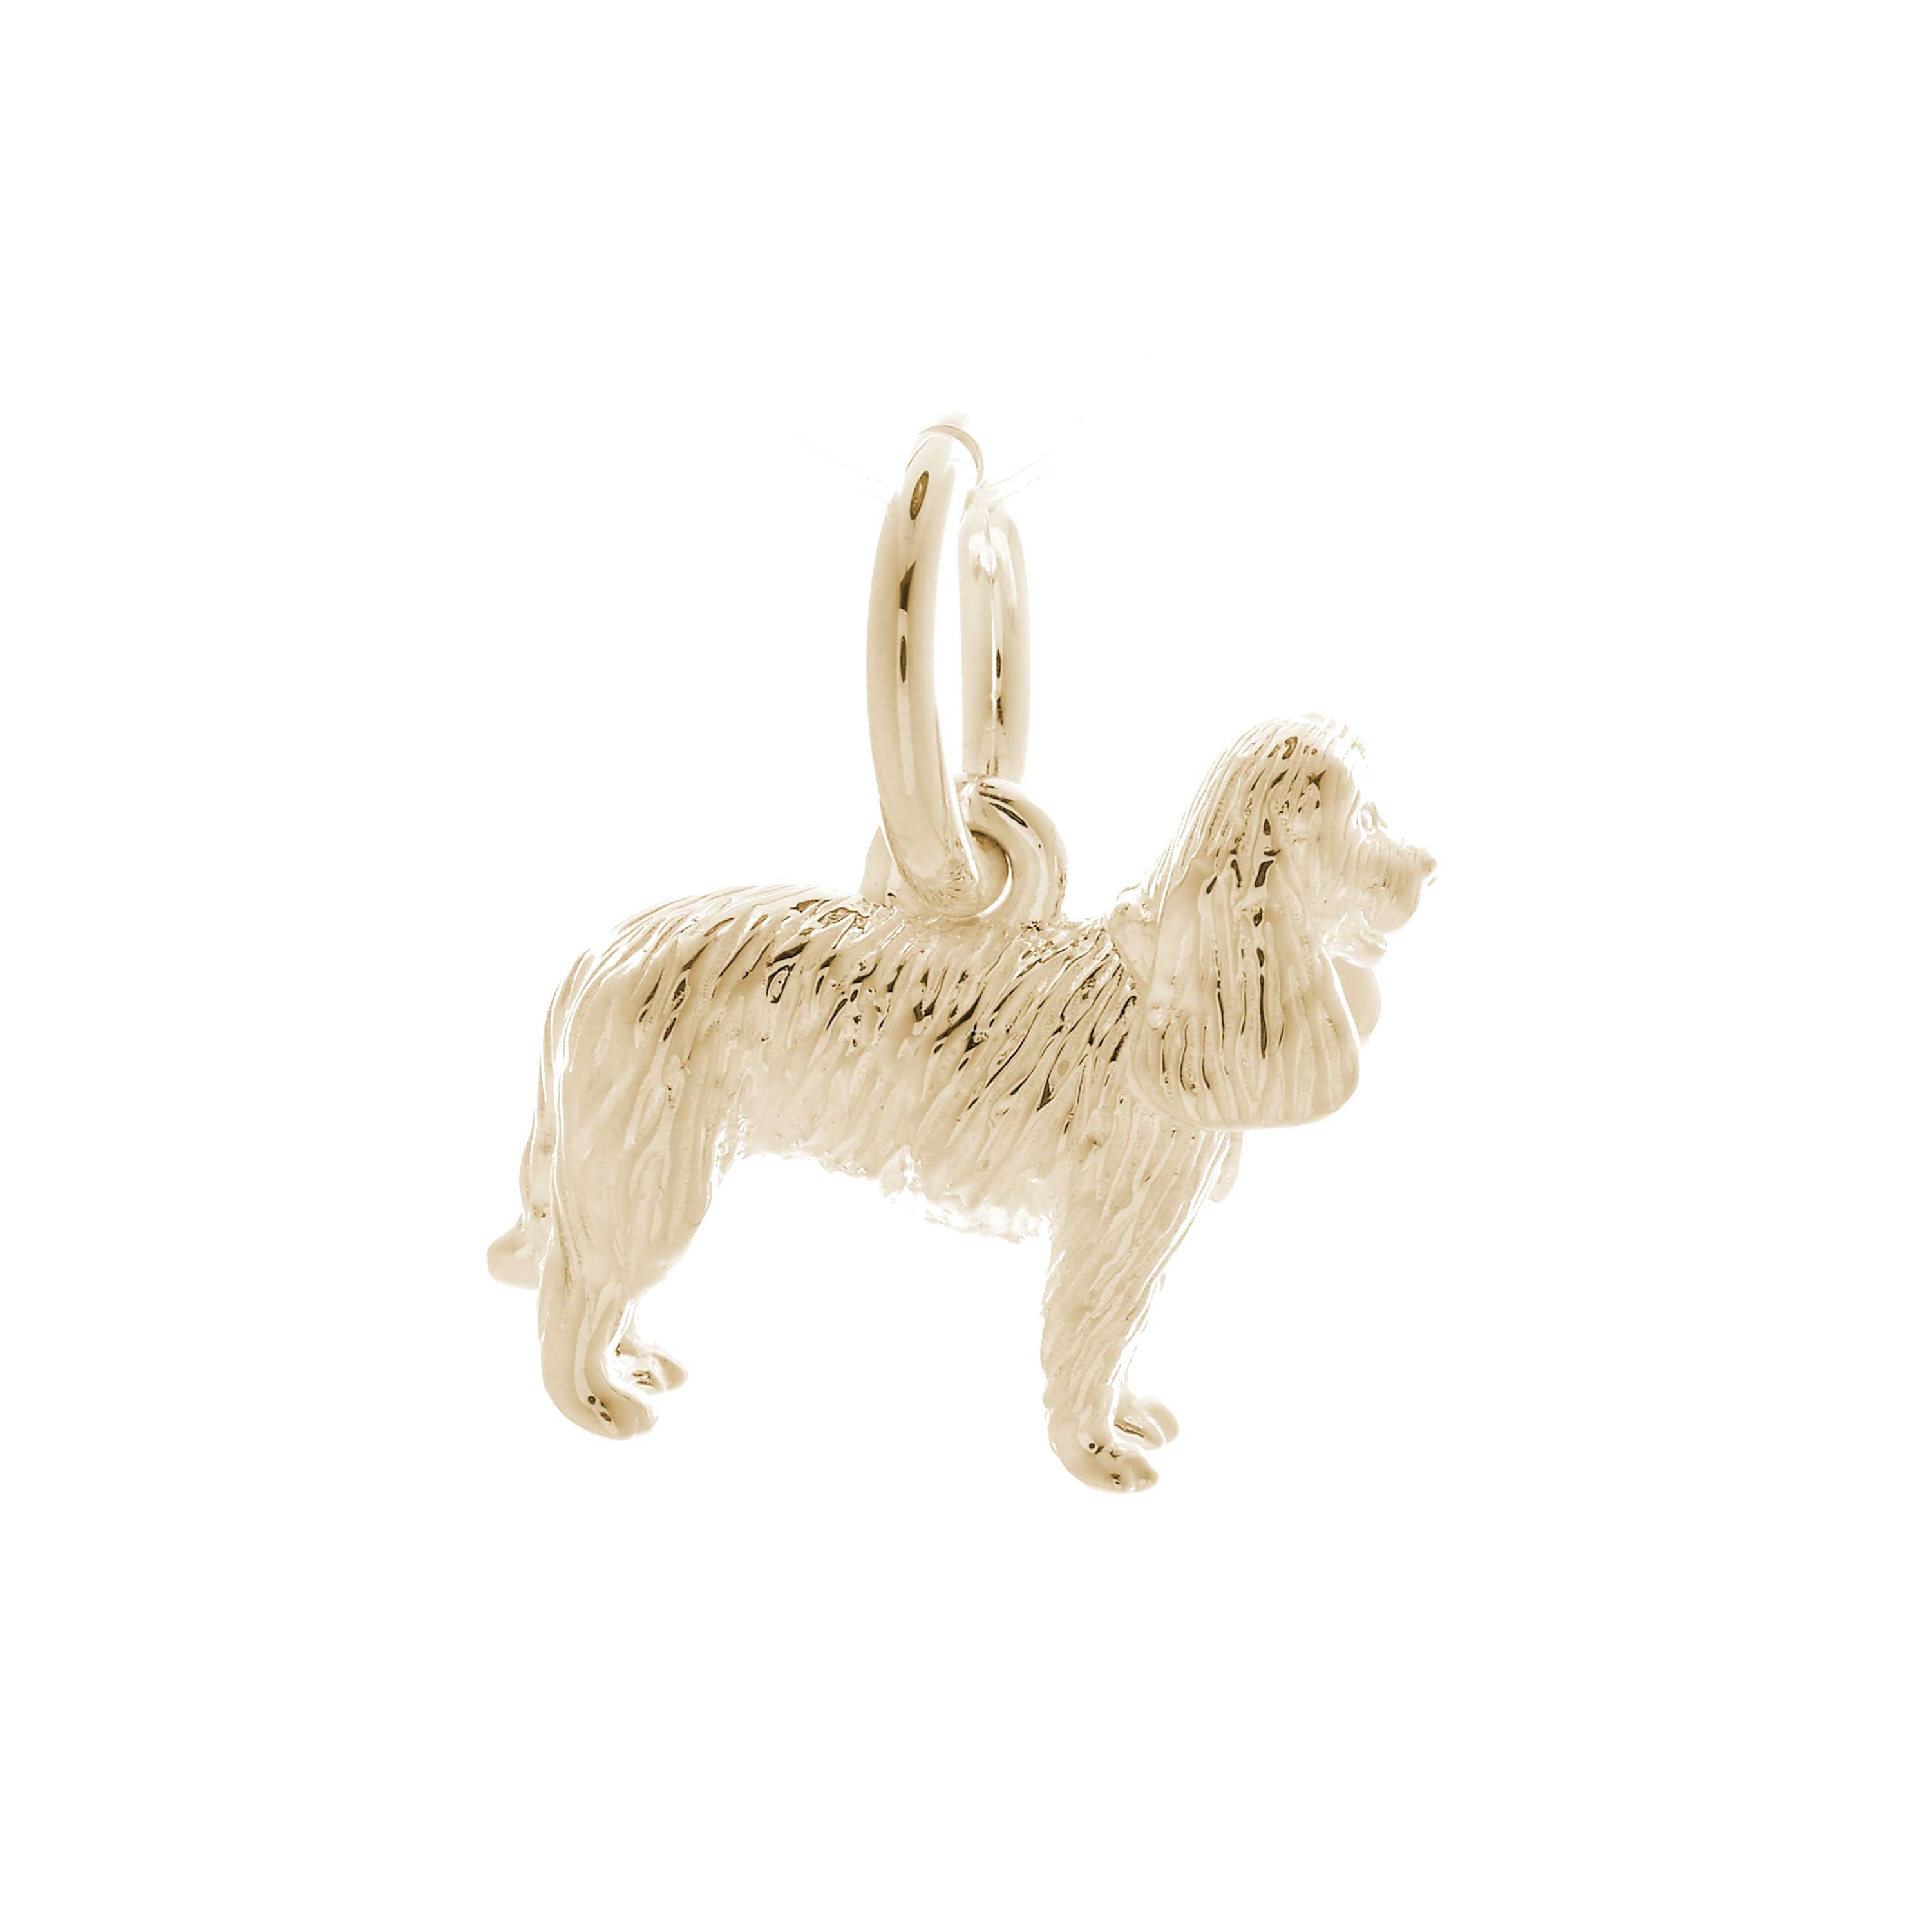 Solid 9ct gold King Charles Spaniel charm with tiny bandana, perfect for a charm bracelet or necklace.